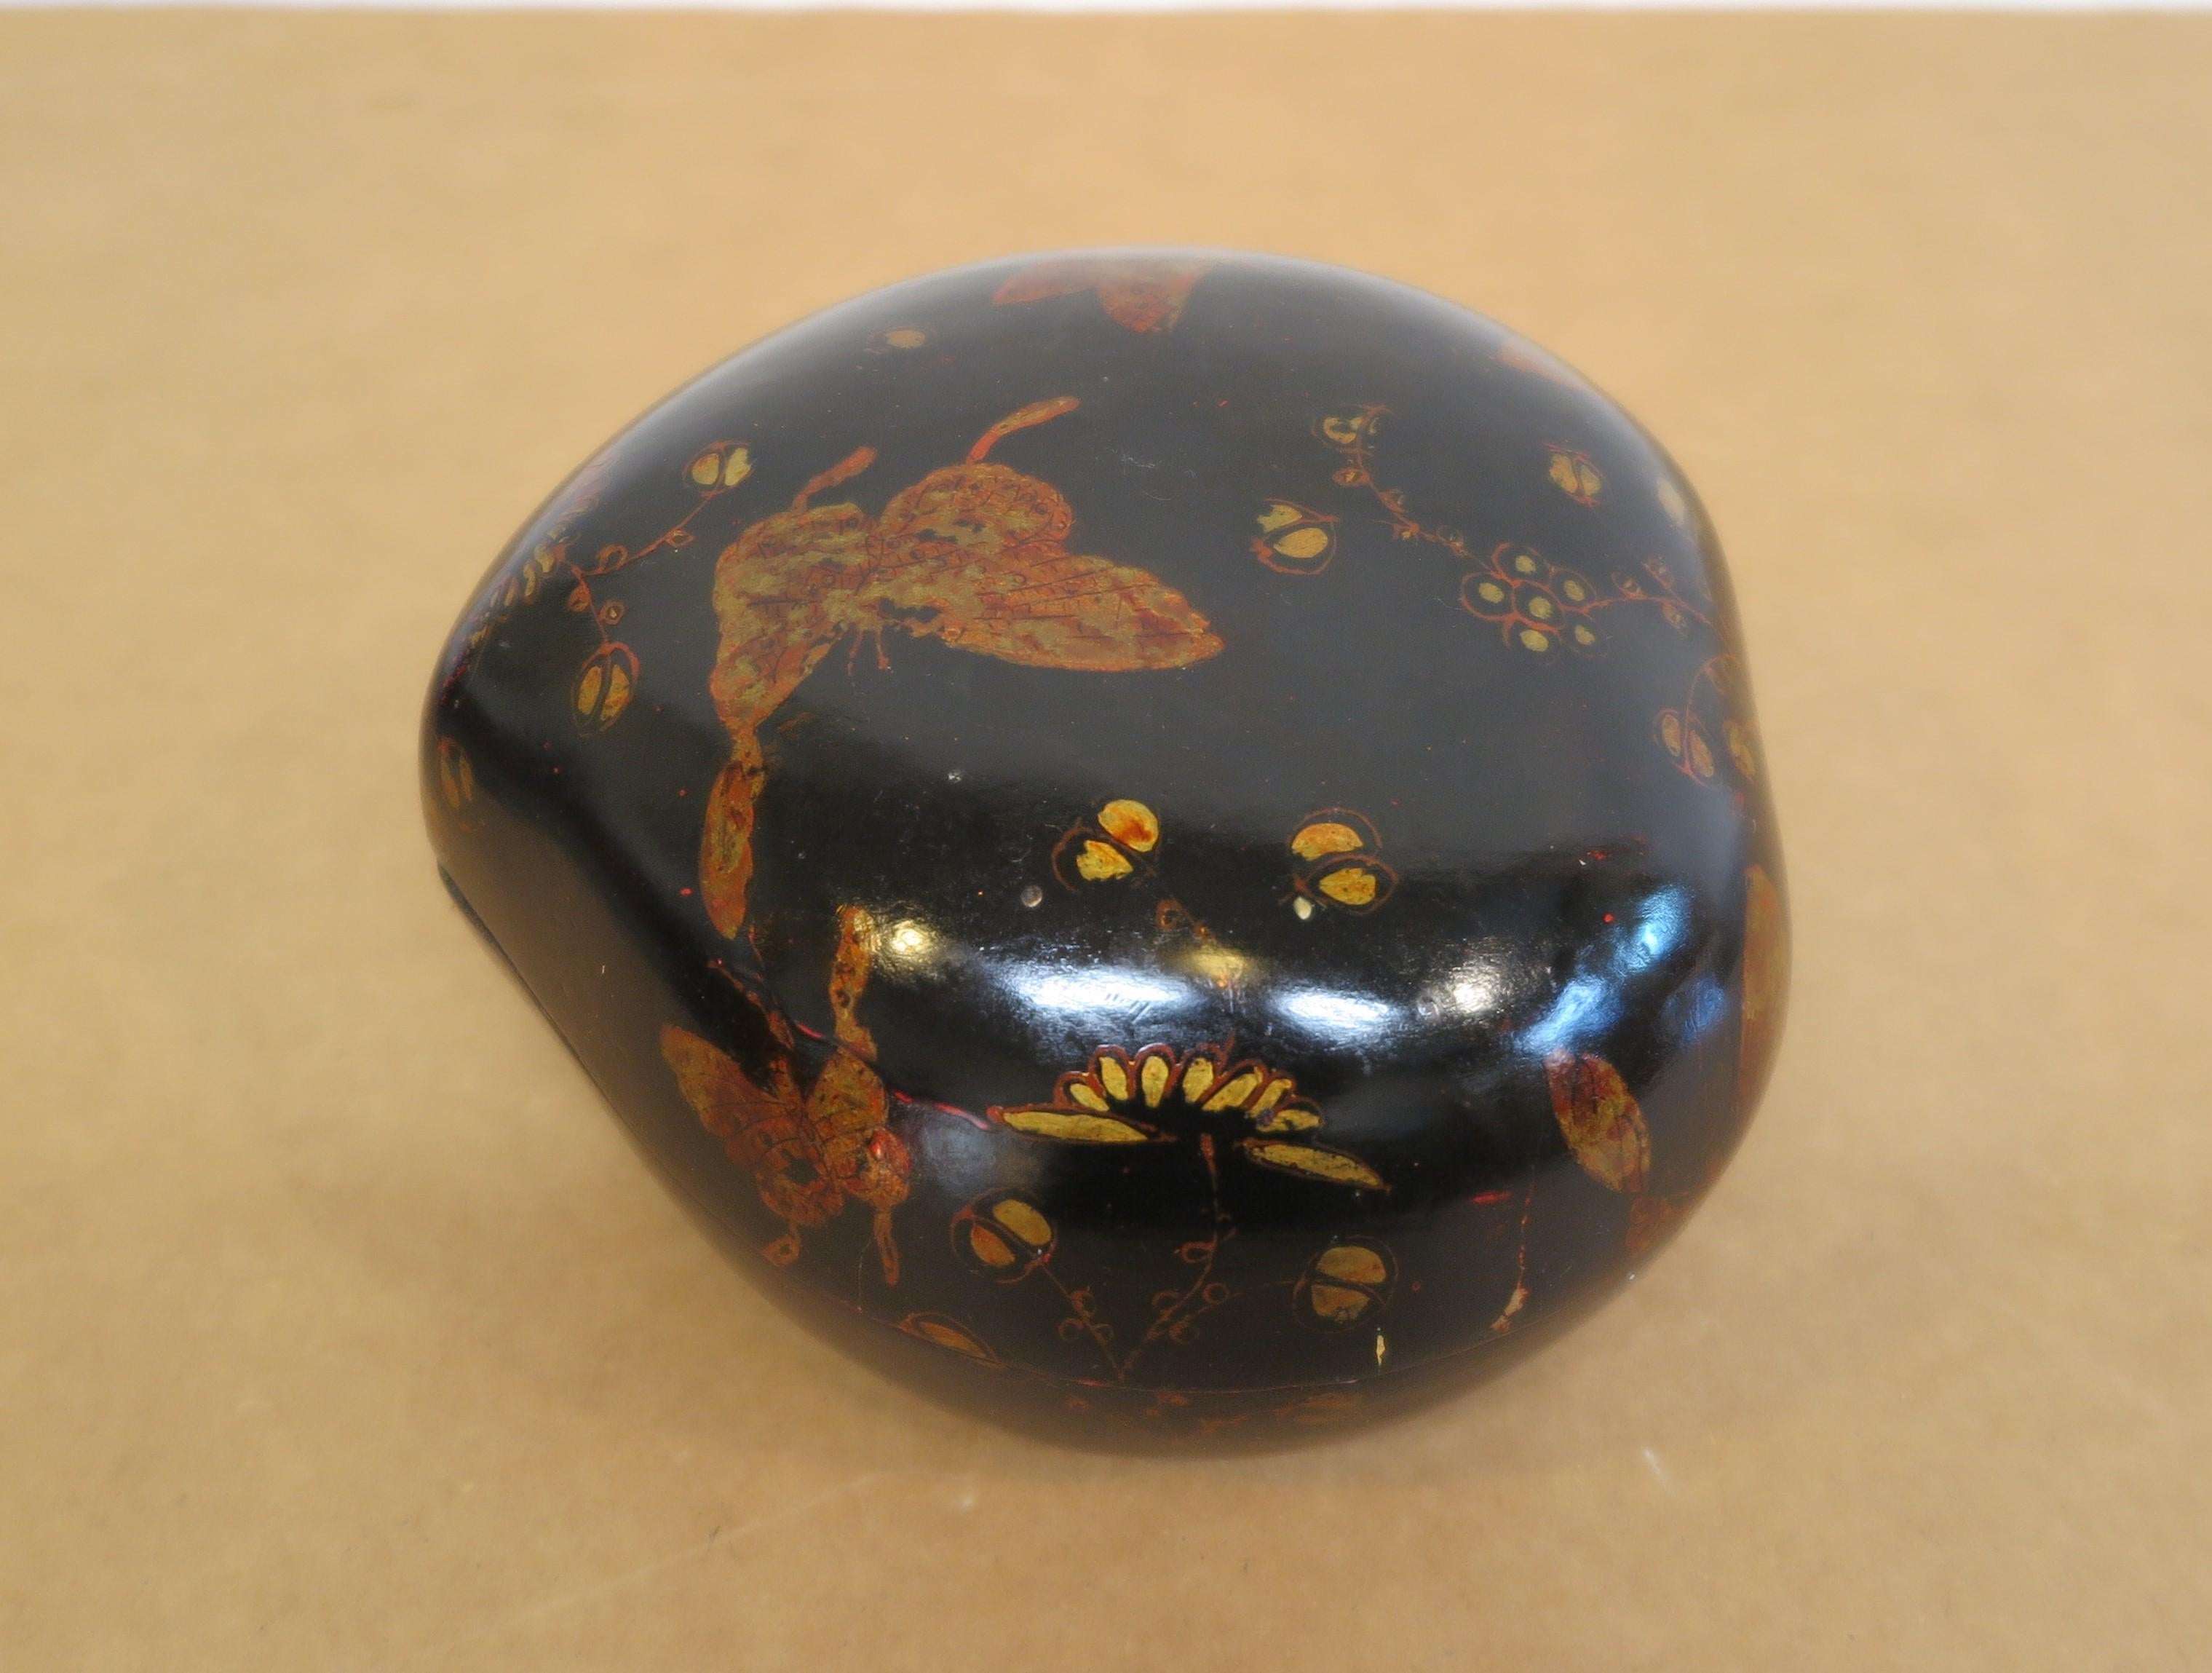 Heart Shaped Chinoiserie Papier-mâché Lacquer Box.  Beautifully painted decorated box with gilt painting on black lacquer.  This is wonderful collectable decorative box that can be used for many small items.  This box is from the 1940's and hard to